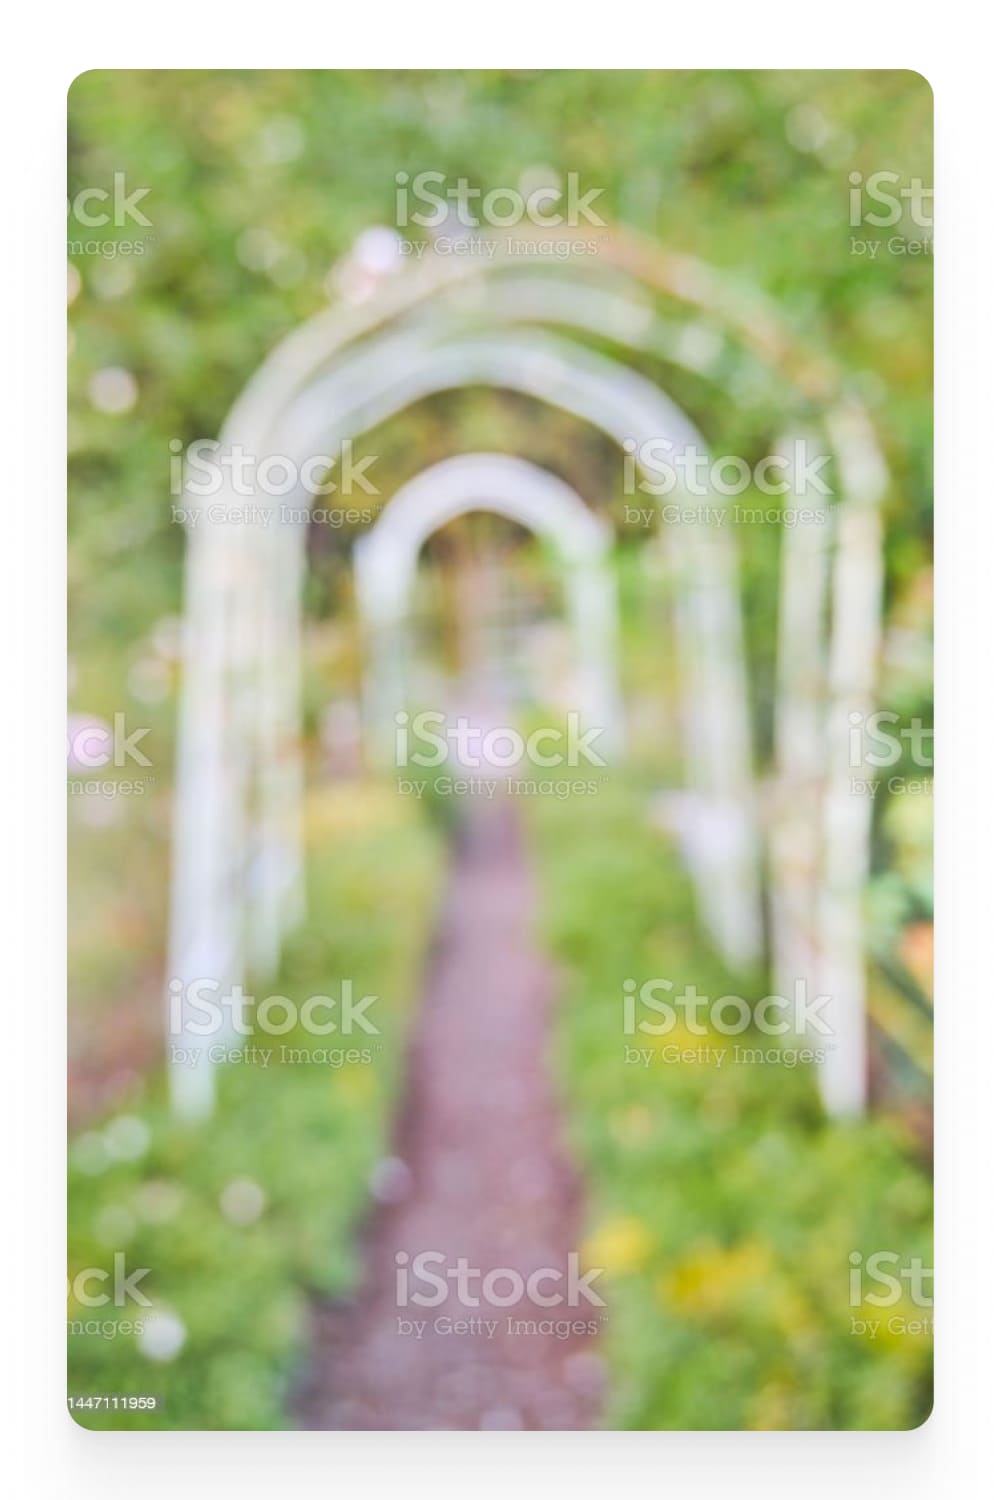 Blurred photo of white arches over walkway.